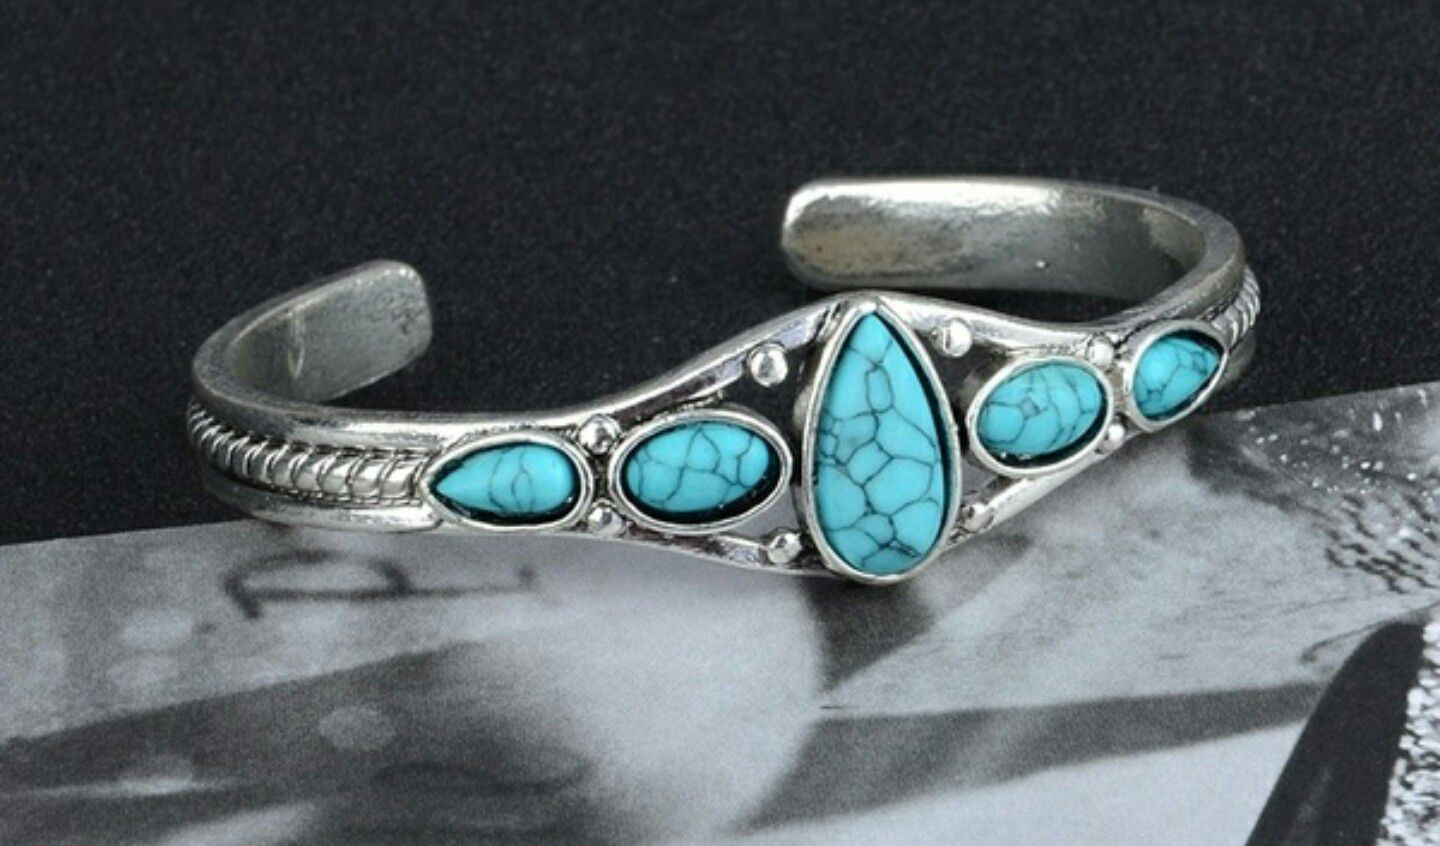 (Shipped Only) Vintage Style Silver Turquoise Bracelet